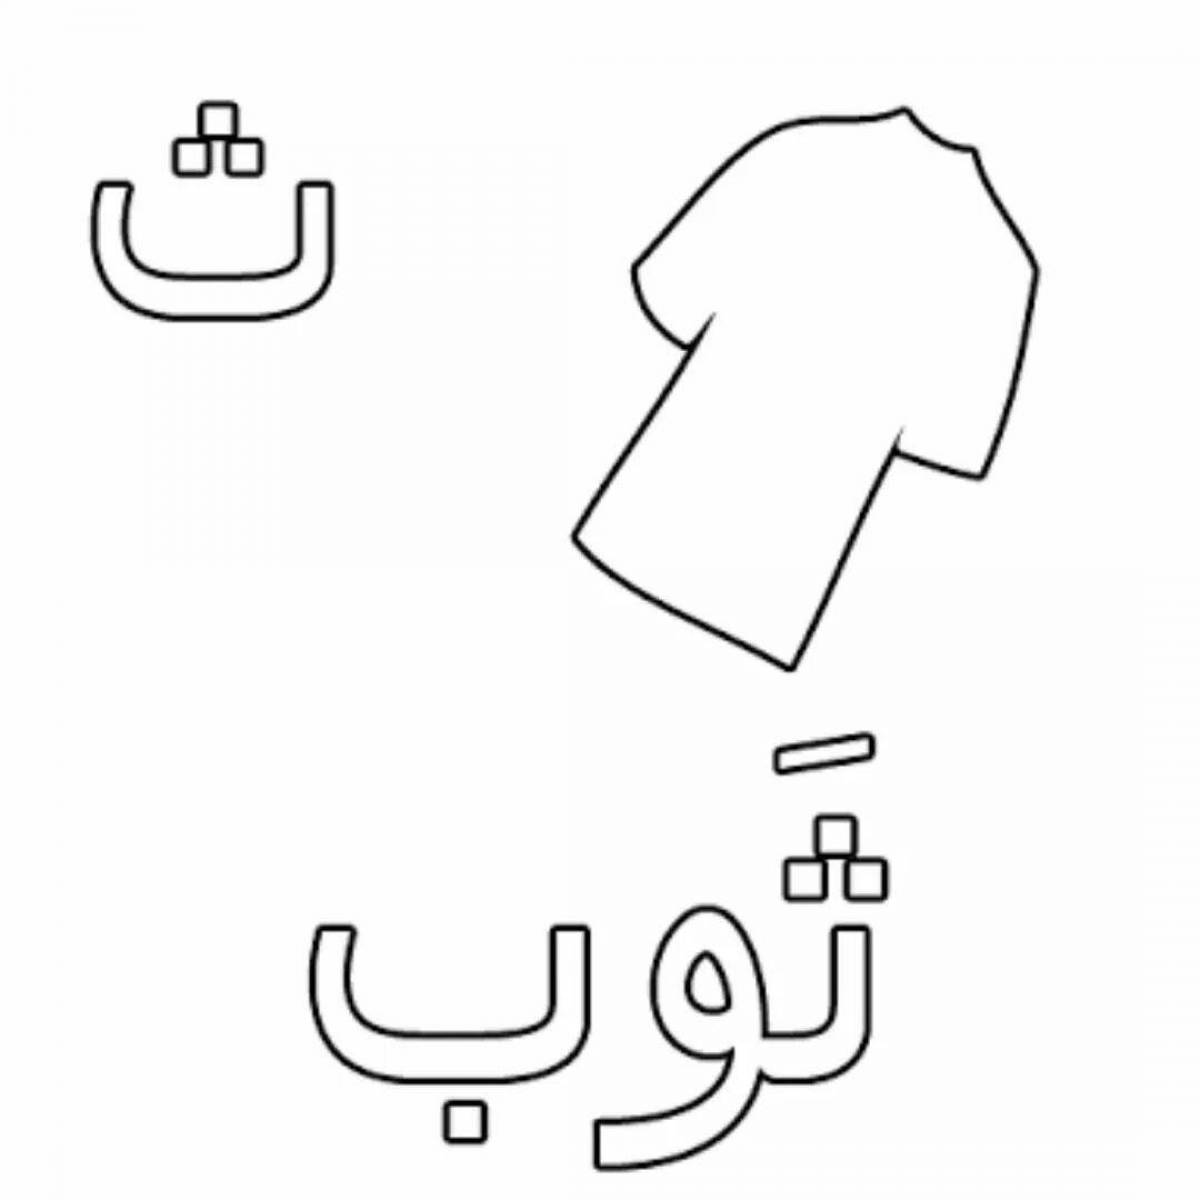 Colorful arabic alphabet coloring page for kids of all races